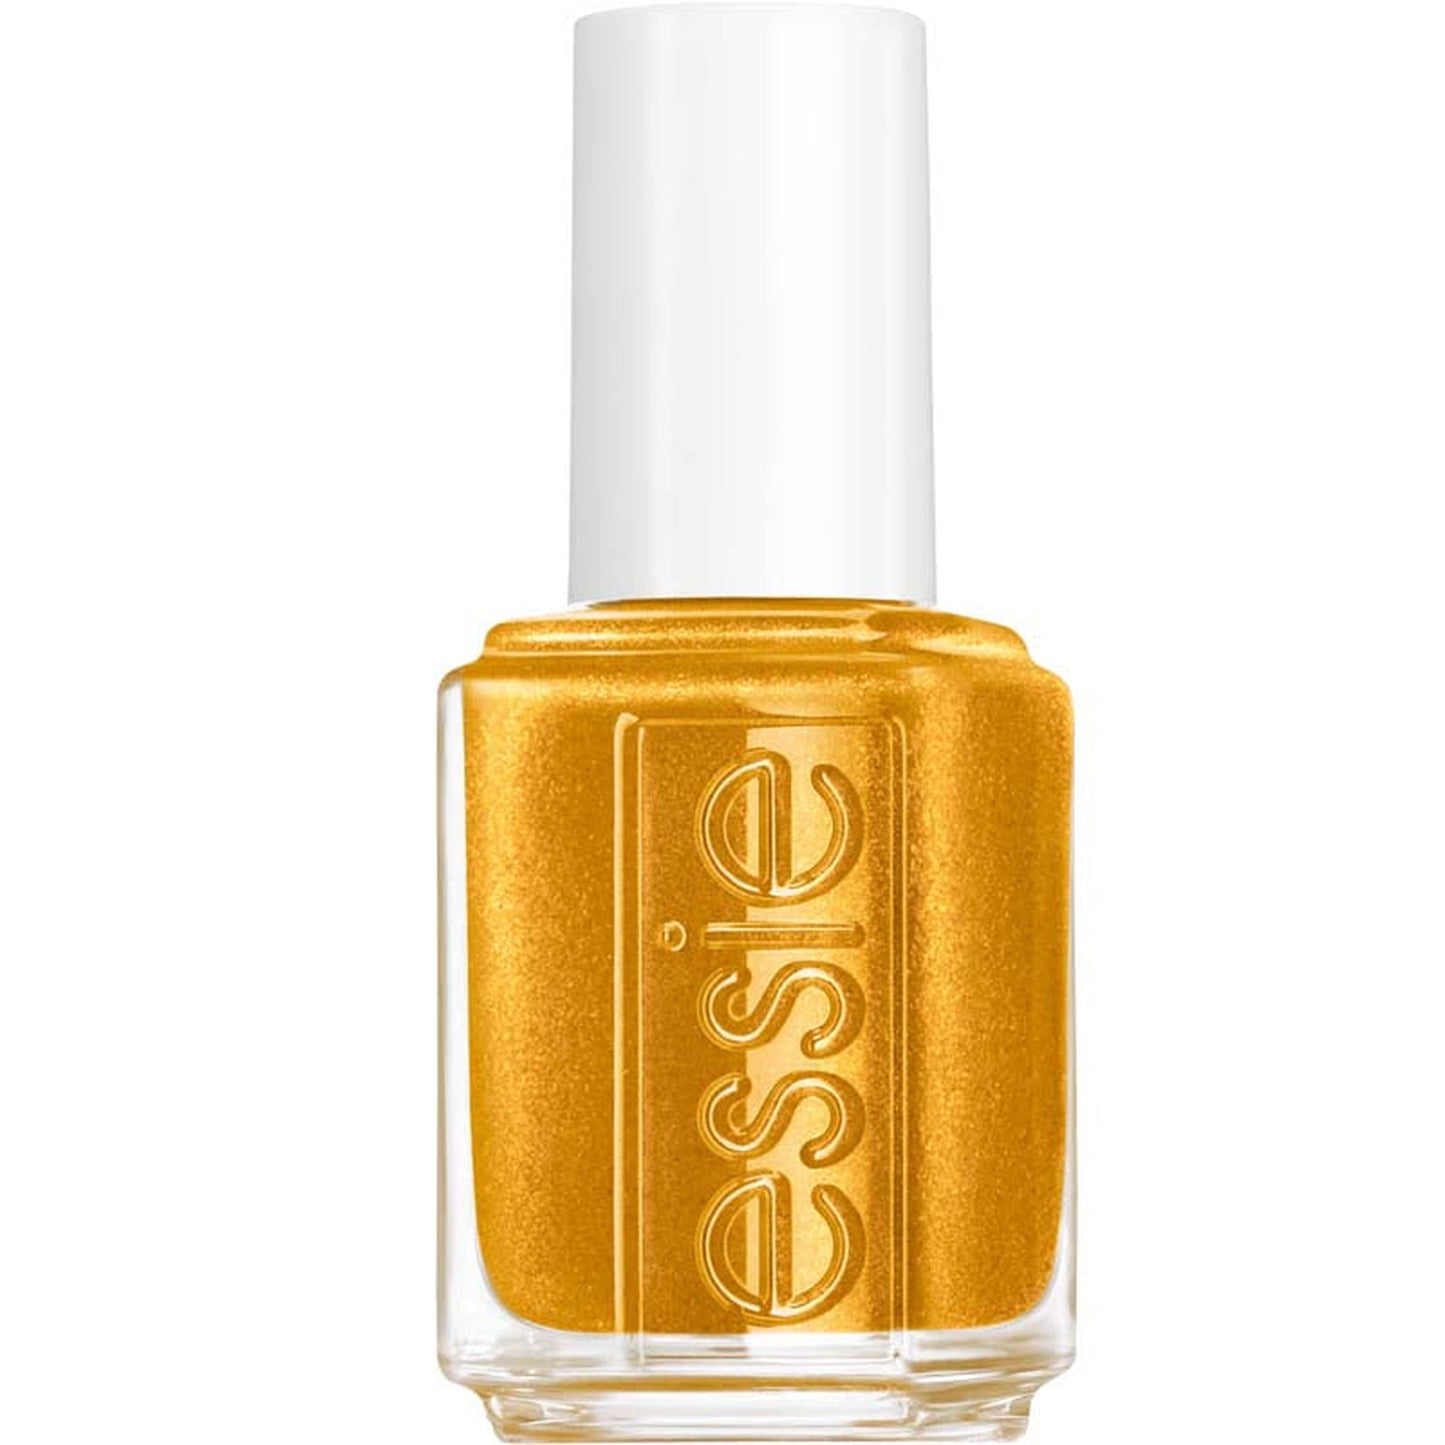 Essie Nail Polish 777 Zest Has Yet To Come-essie-BeautyNmakeup.co.uk